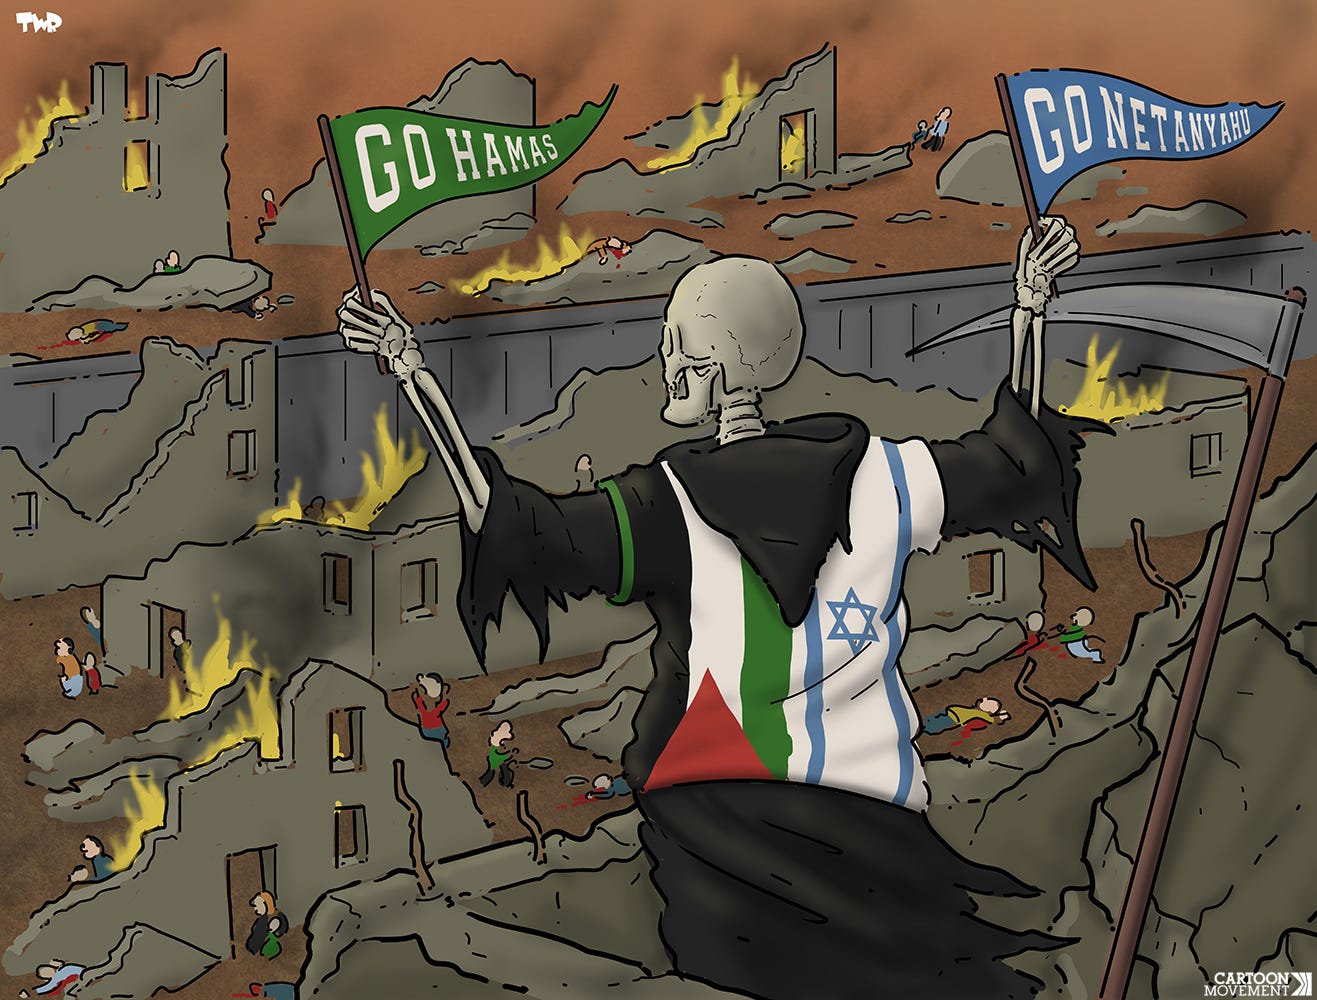 Cartoon showing the Grim Reaper wearing a shirt with both the Palestinian and the Israeli flag, with a flag that says “Go Hamas” and a flag that says “Go Netanyahu” in each hand, cheering on the war between Israel and Palestine.